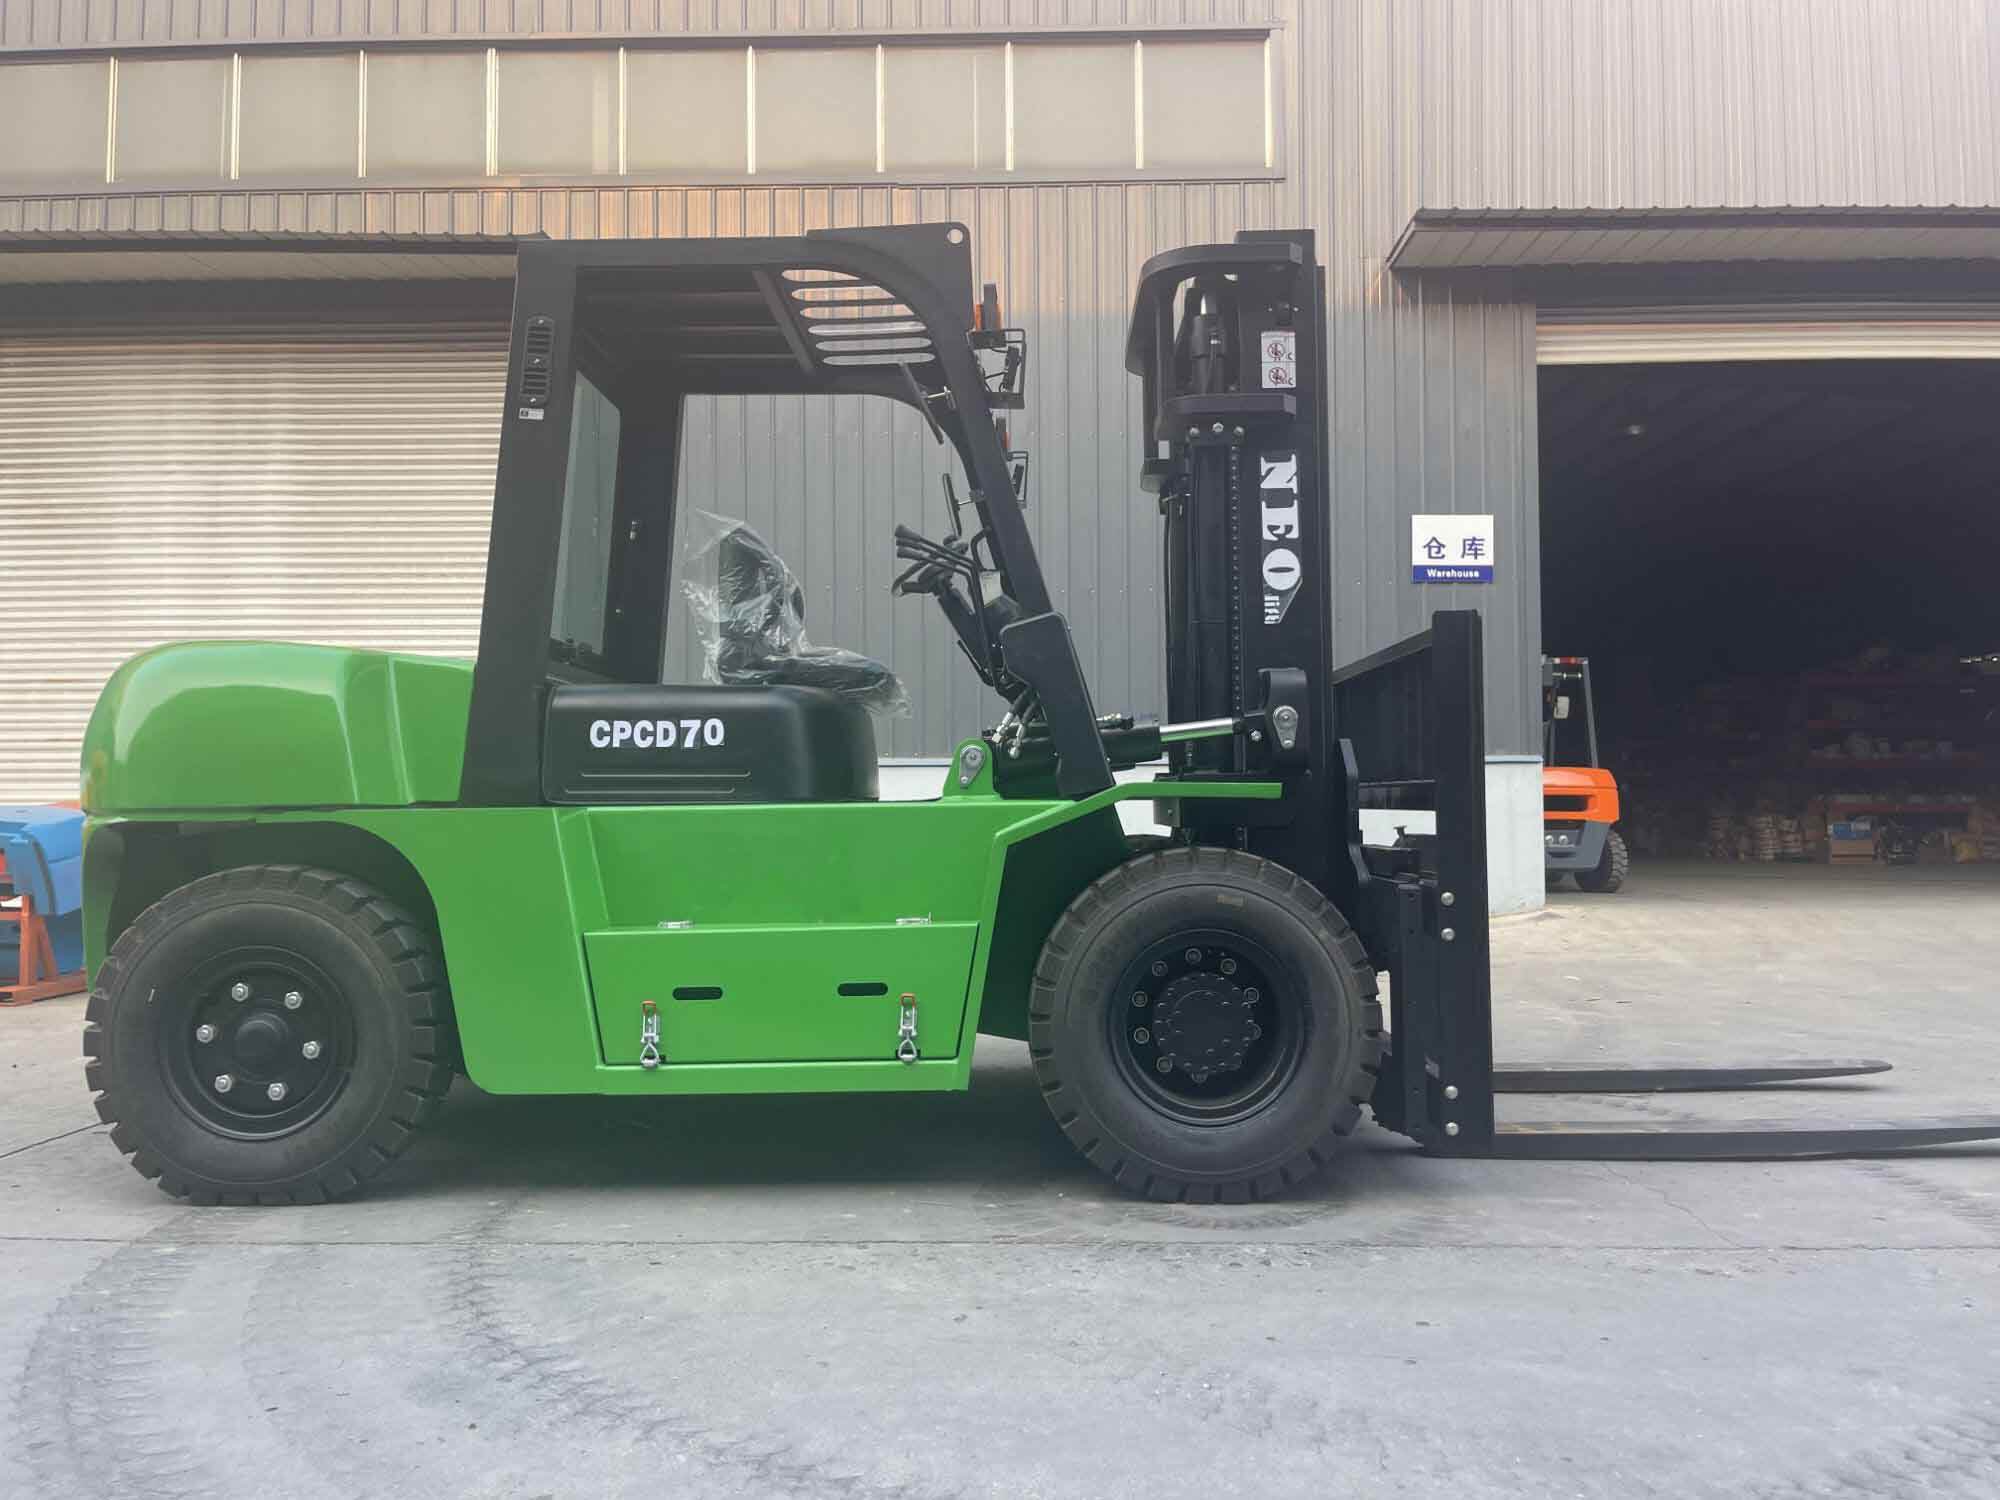 NEOlift launches a new type heavy-duty diesel forklift